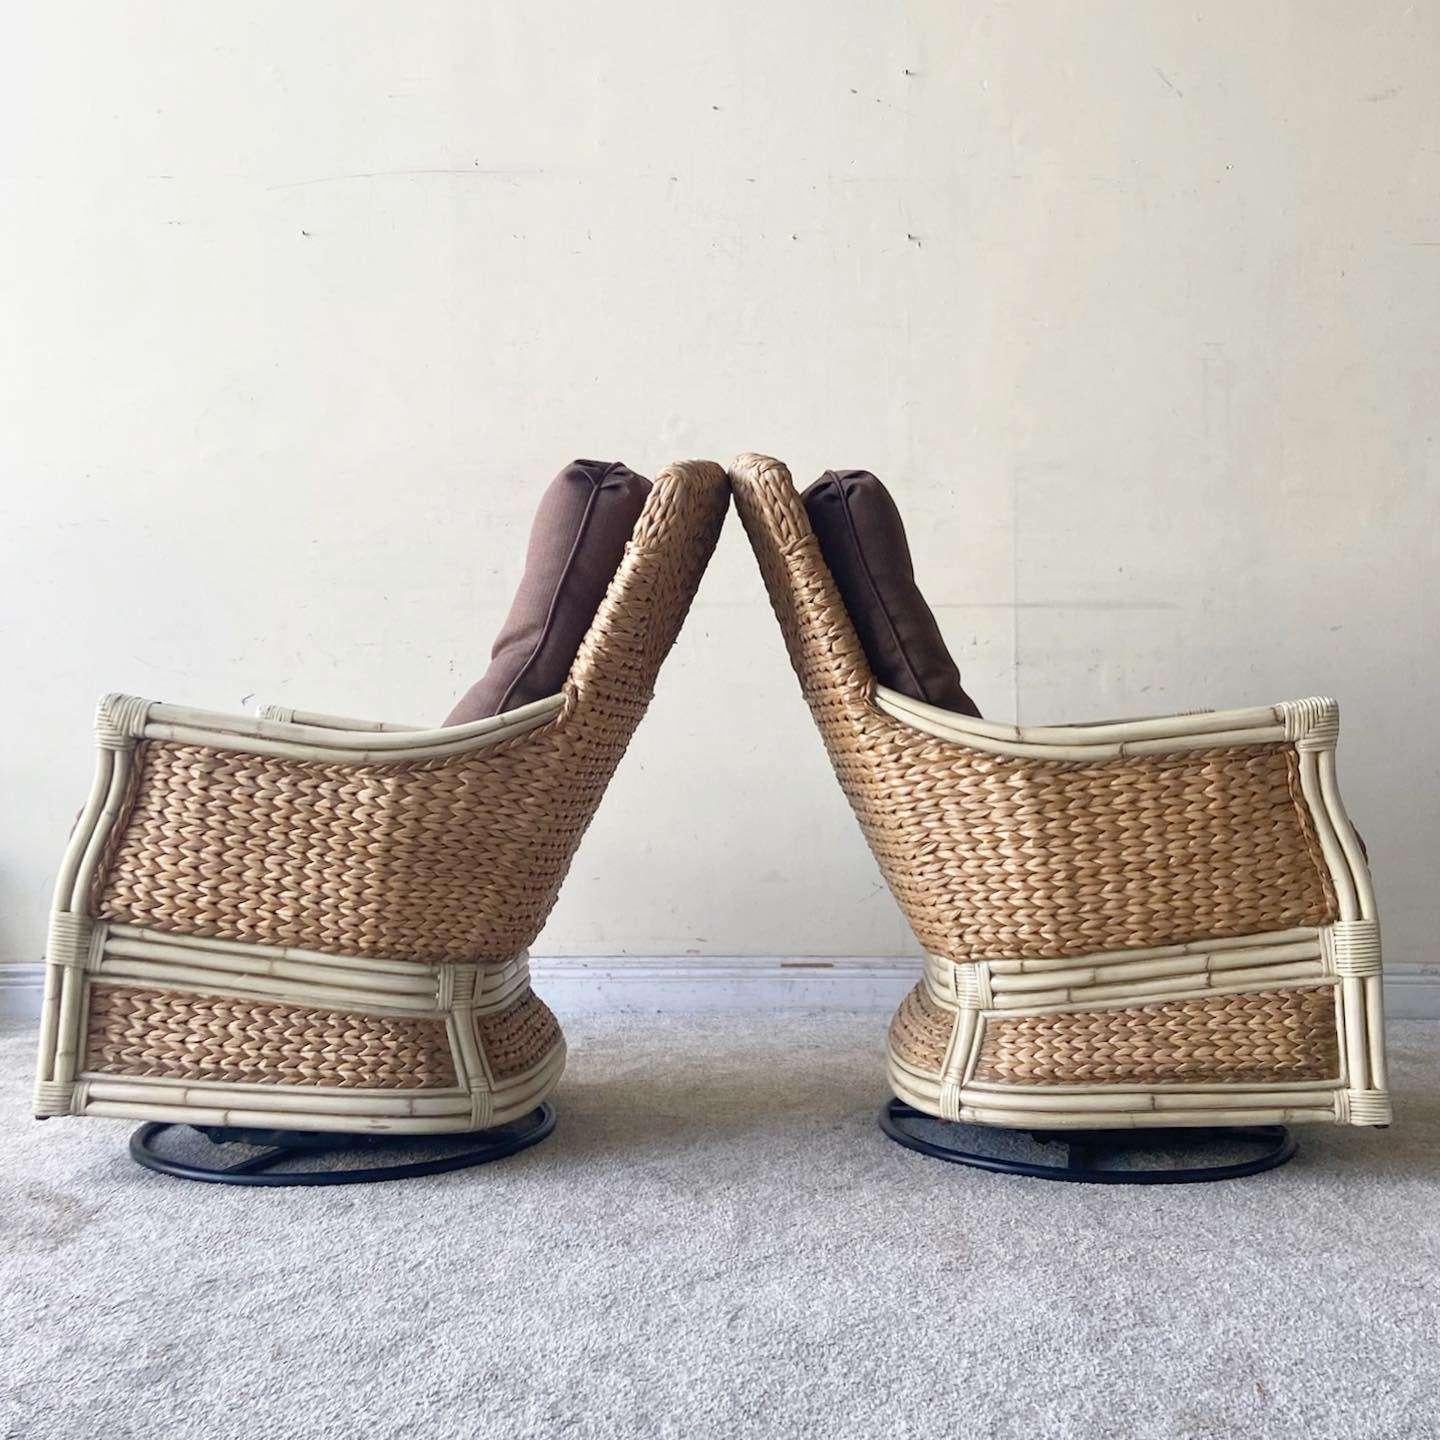 Amazing vintage handmade bohemian rocking swivel chairs. Each feature a painted cream bamboo and rattan frame with woven sea grass through out the chairs.

Seat height is 20.5 in